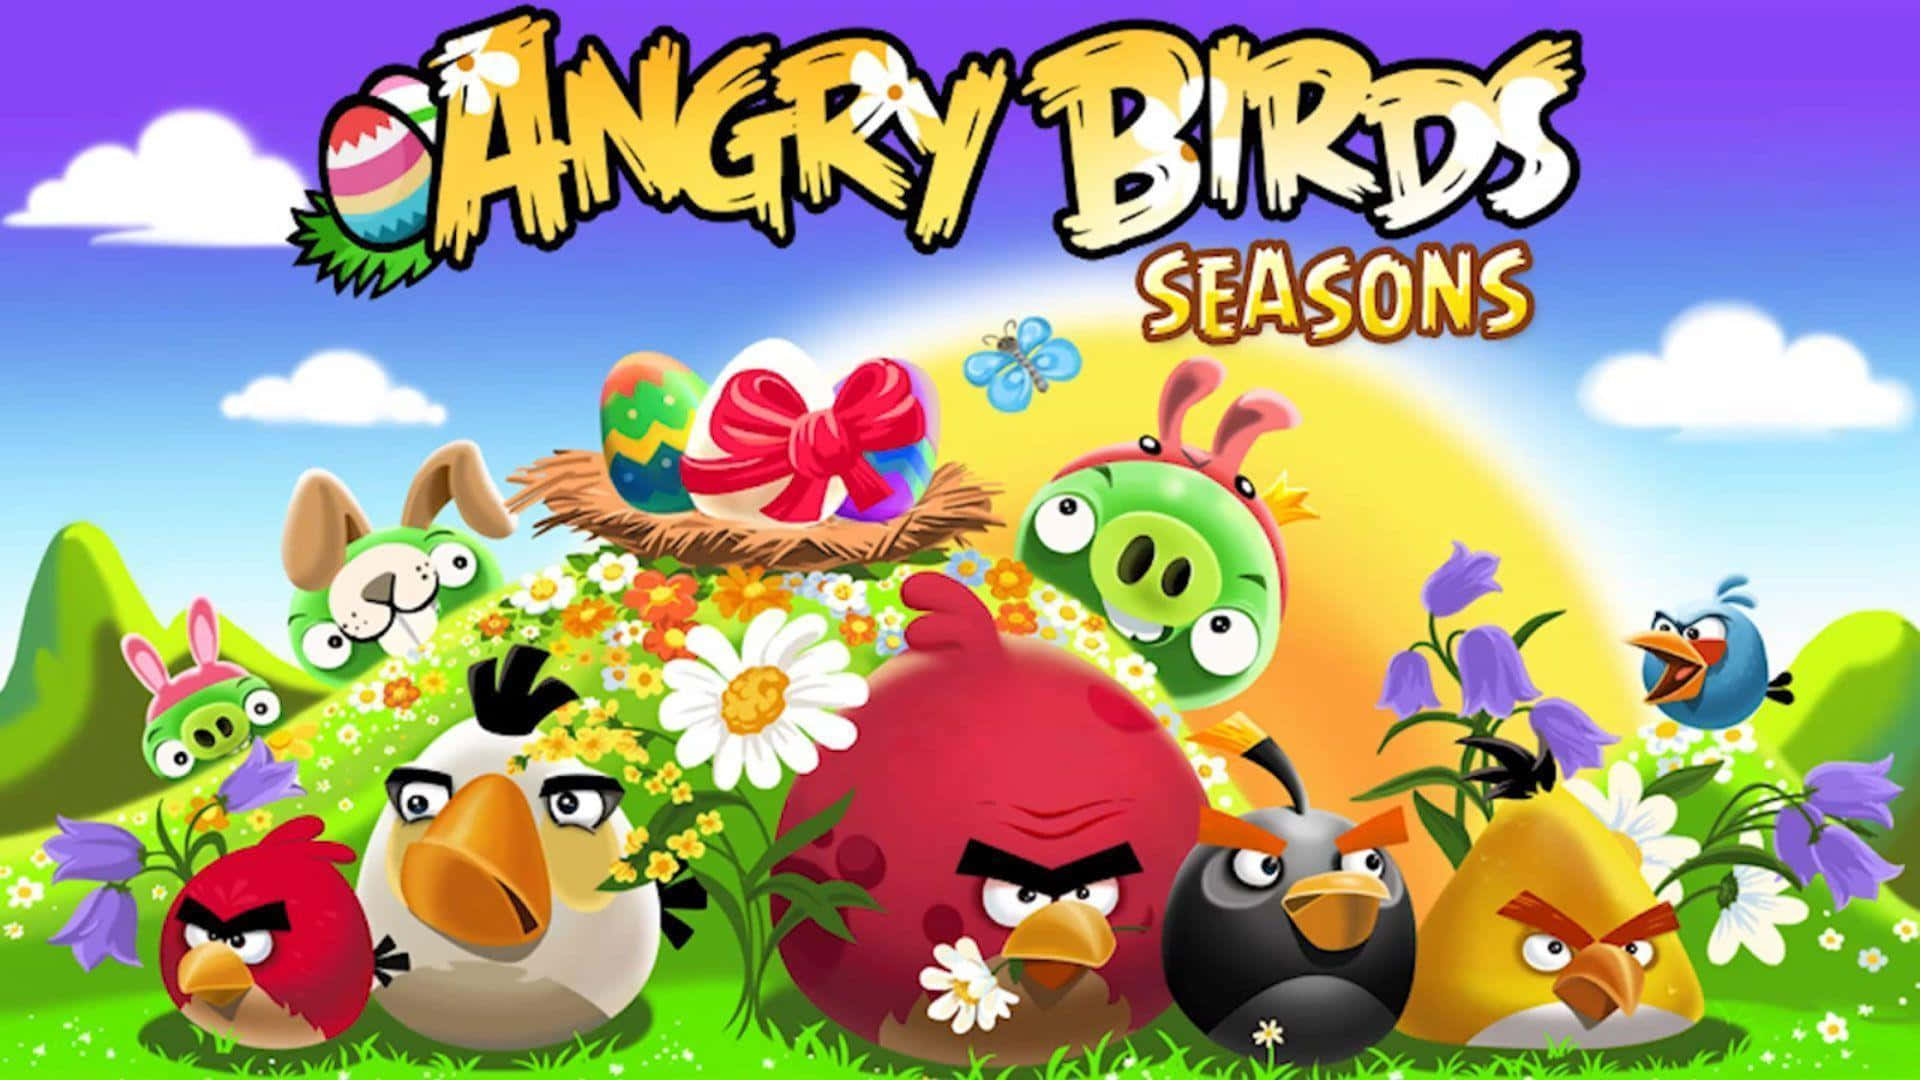 angry bird game background